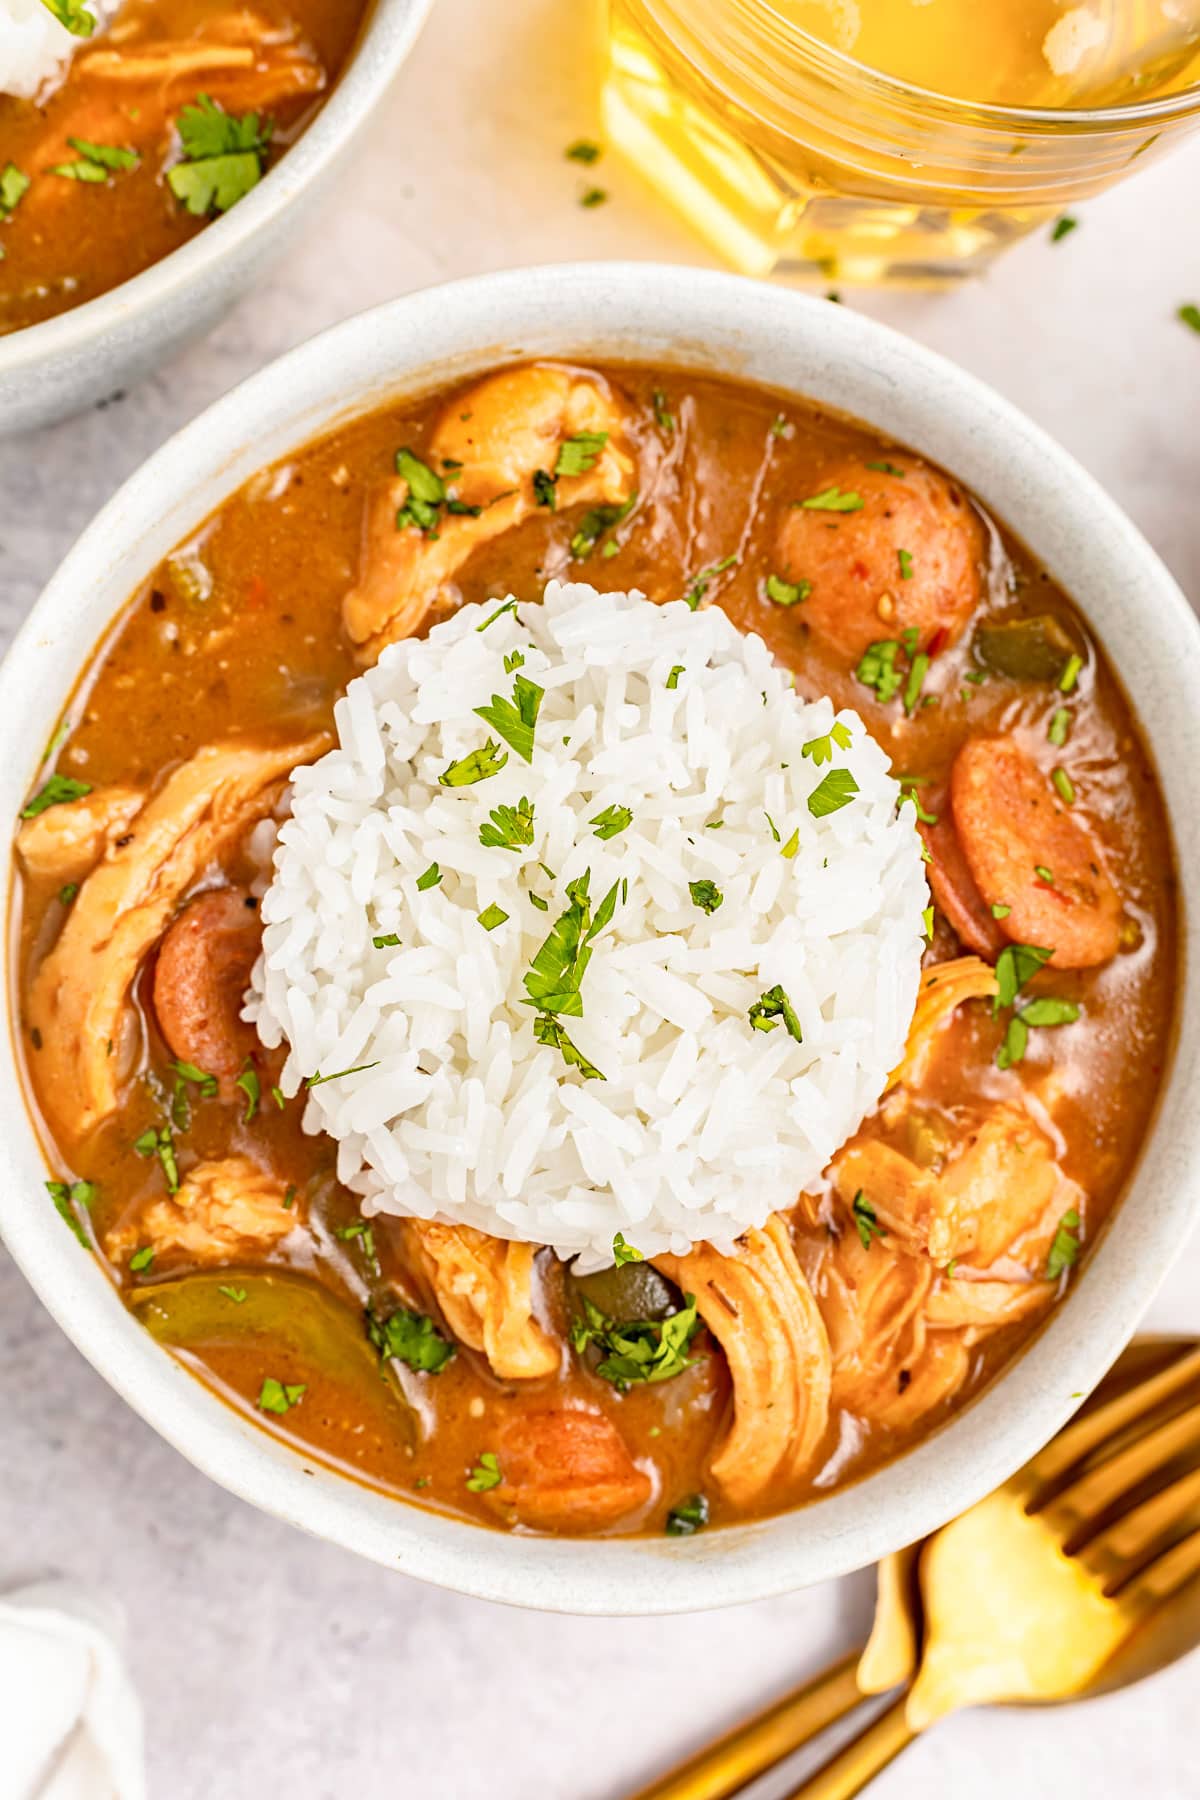 Chicken Sausage Gumbo Soup - The Whole Cook